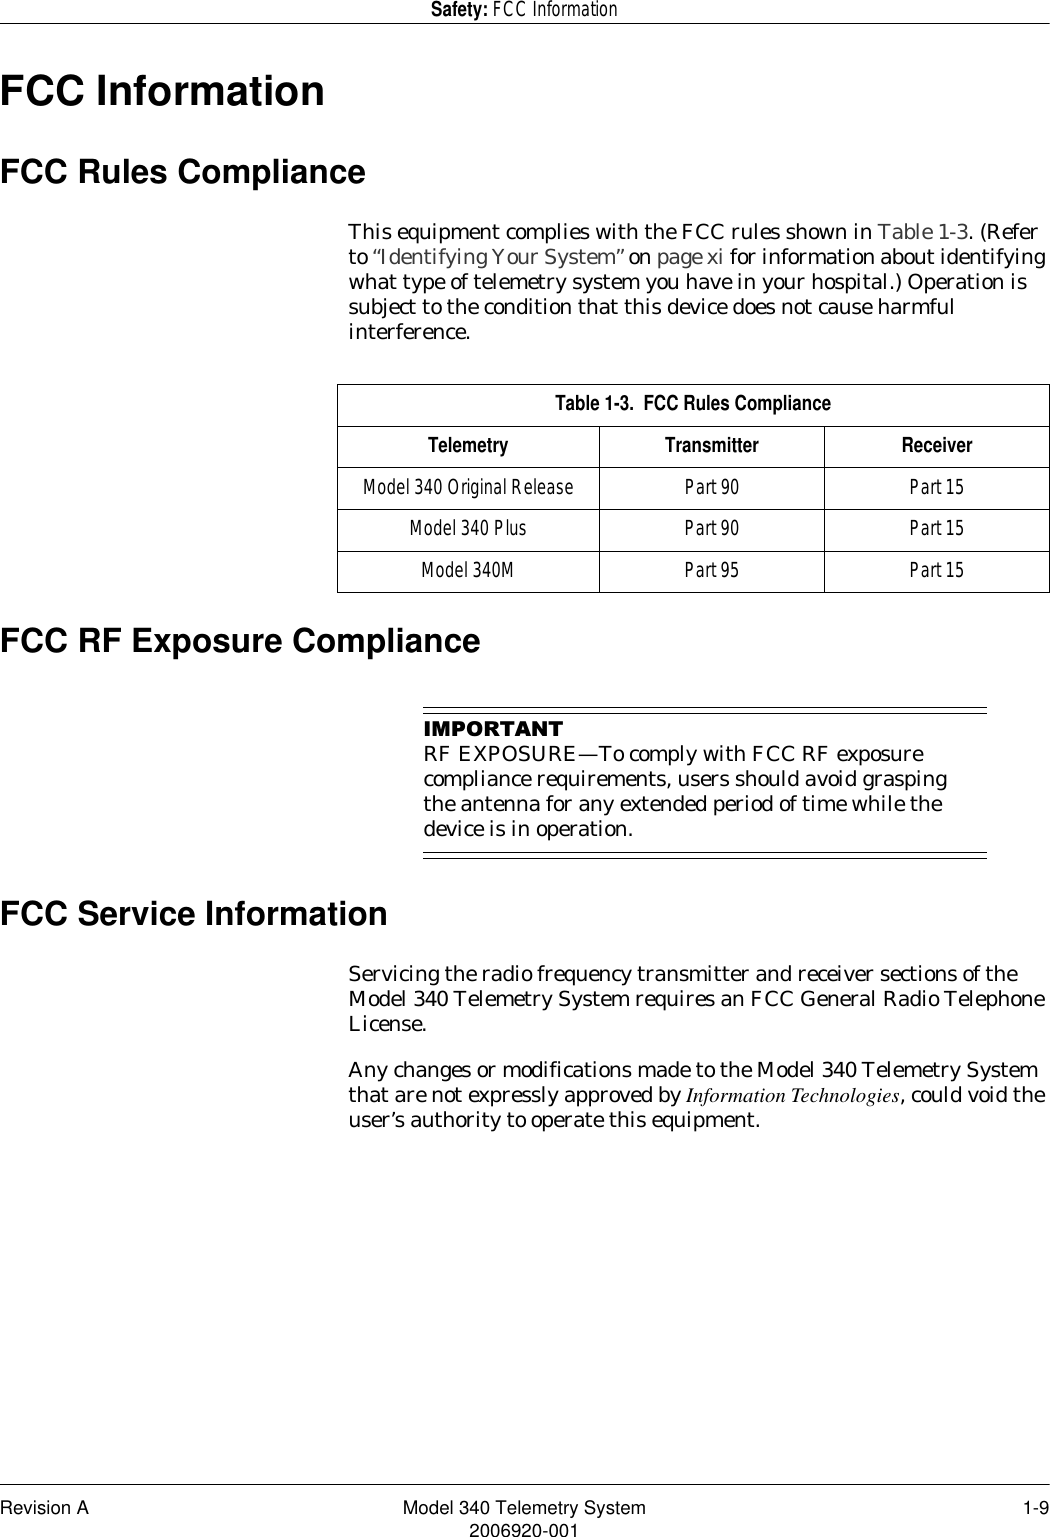 Revision A Model 340 Telemetry System 1-92006920-001Safety: FCC InformationFCC InformationFCC Rules ComplianceThis equipment complies with the FCC rules shown in Table 1-3. (Refer to “Identifying Your System” on page xi for information about identifying what type of telemetry system you have in your hospital.) Operation is subject to the condition that this device does not cause harmful interference.FCC RF Exposure Compliance,03257$17RF EXPOSURE—To comply with FCC RF exposure compliance requirements, users should avoid grasping the antenna for any extended period of time while the device is in operation.FCC Service InformationServicing the radio frequency transmitter and receiver sections of the Model 340 Telemetry System requires an FCC General Radio Telephone License.Any changes or modifications made to the Model 340 Telemetry System that are not expressly approved by Information Technologies, could void the user’s authority to operate this equipment.Table 1-3.  FCC Rules ComplianceTelemetry Transmitter ReceiverModel 340 Original Release Part 90 Part 15Model 340 Plus Part 90 Part 15Model 340M Part 95 Part 15